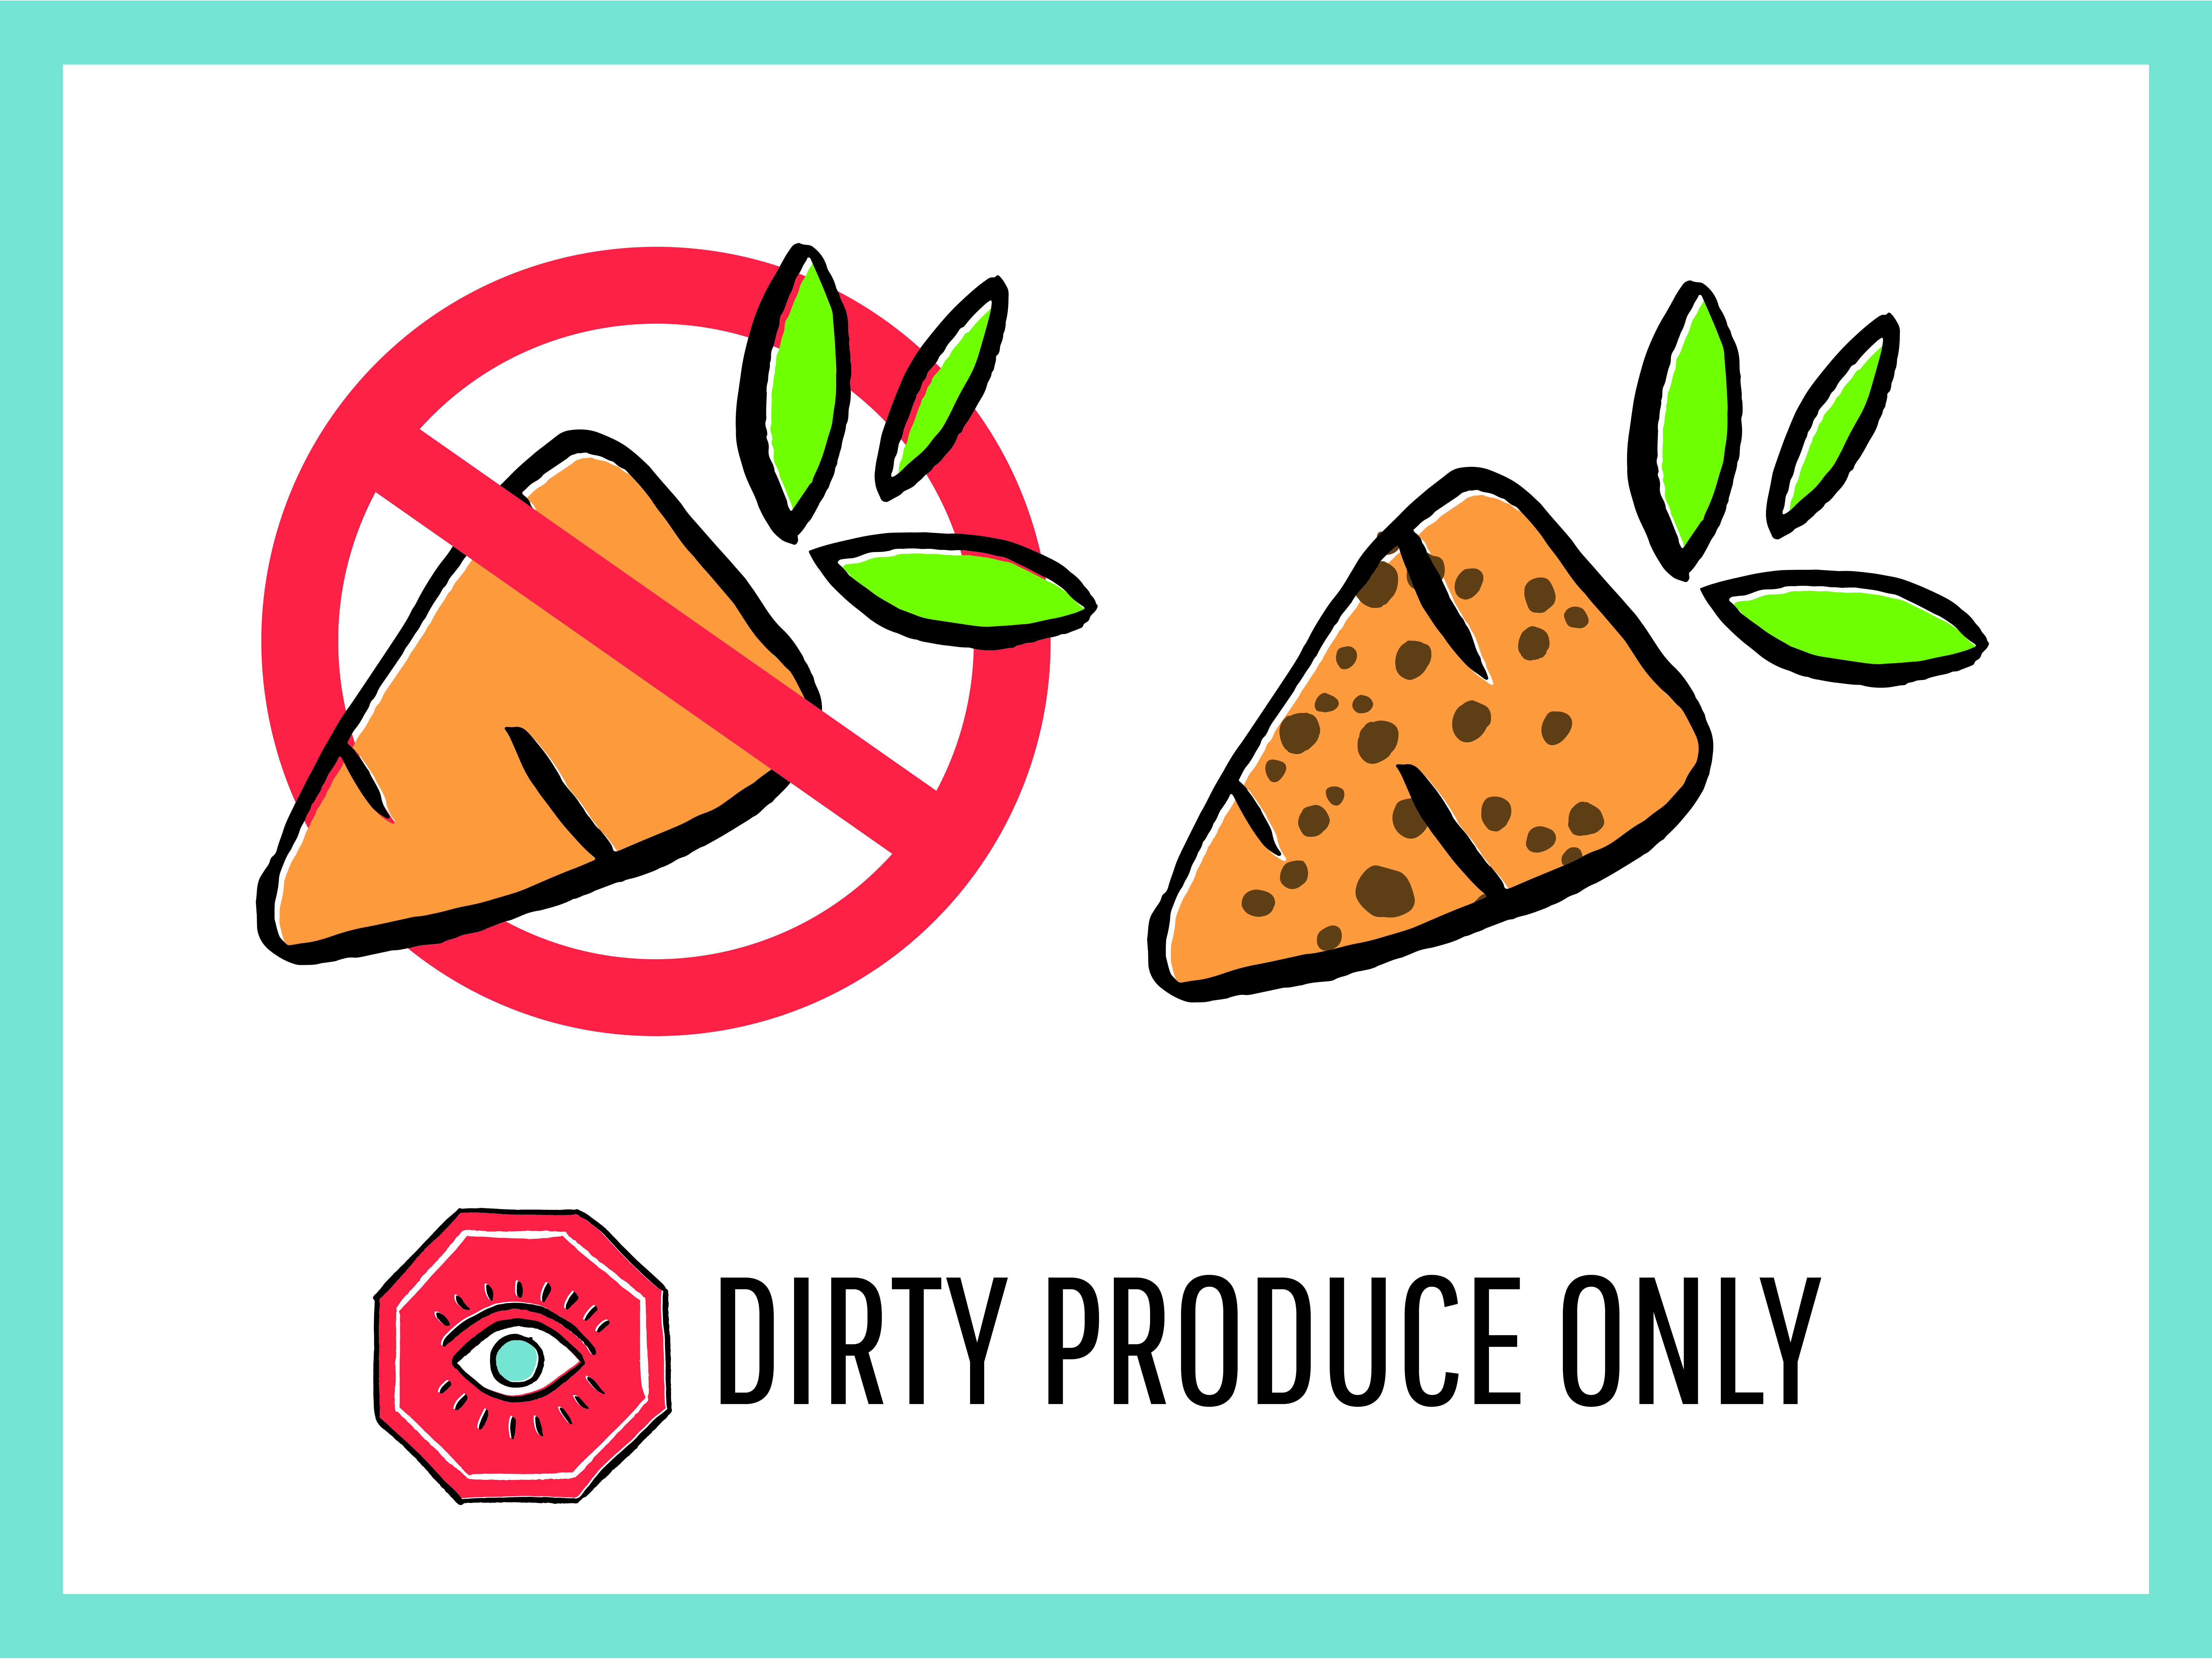 DirtyProduceOnly